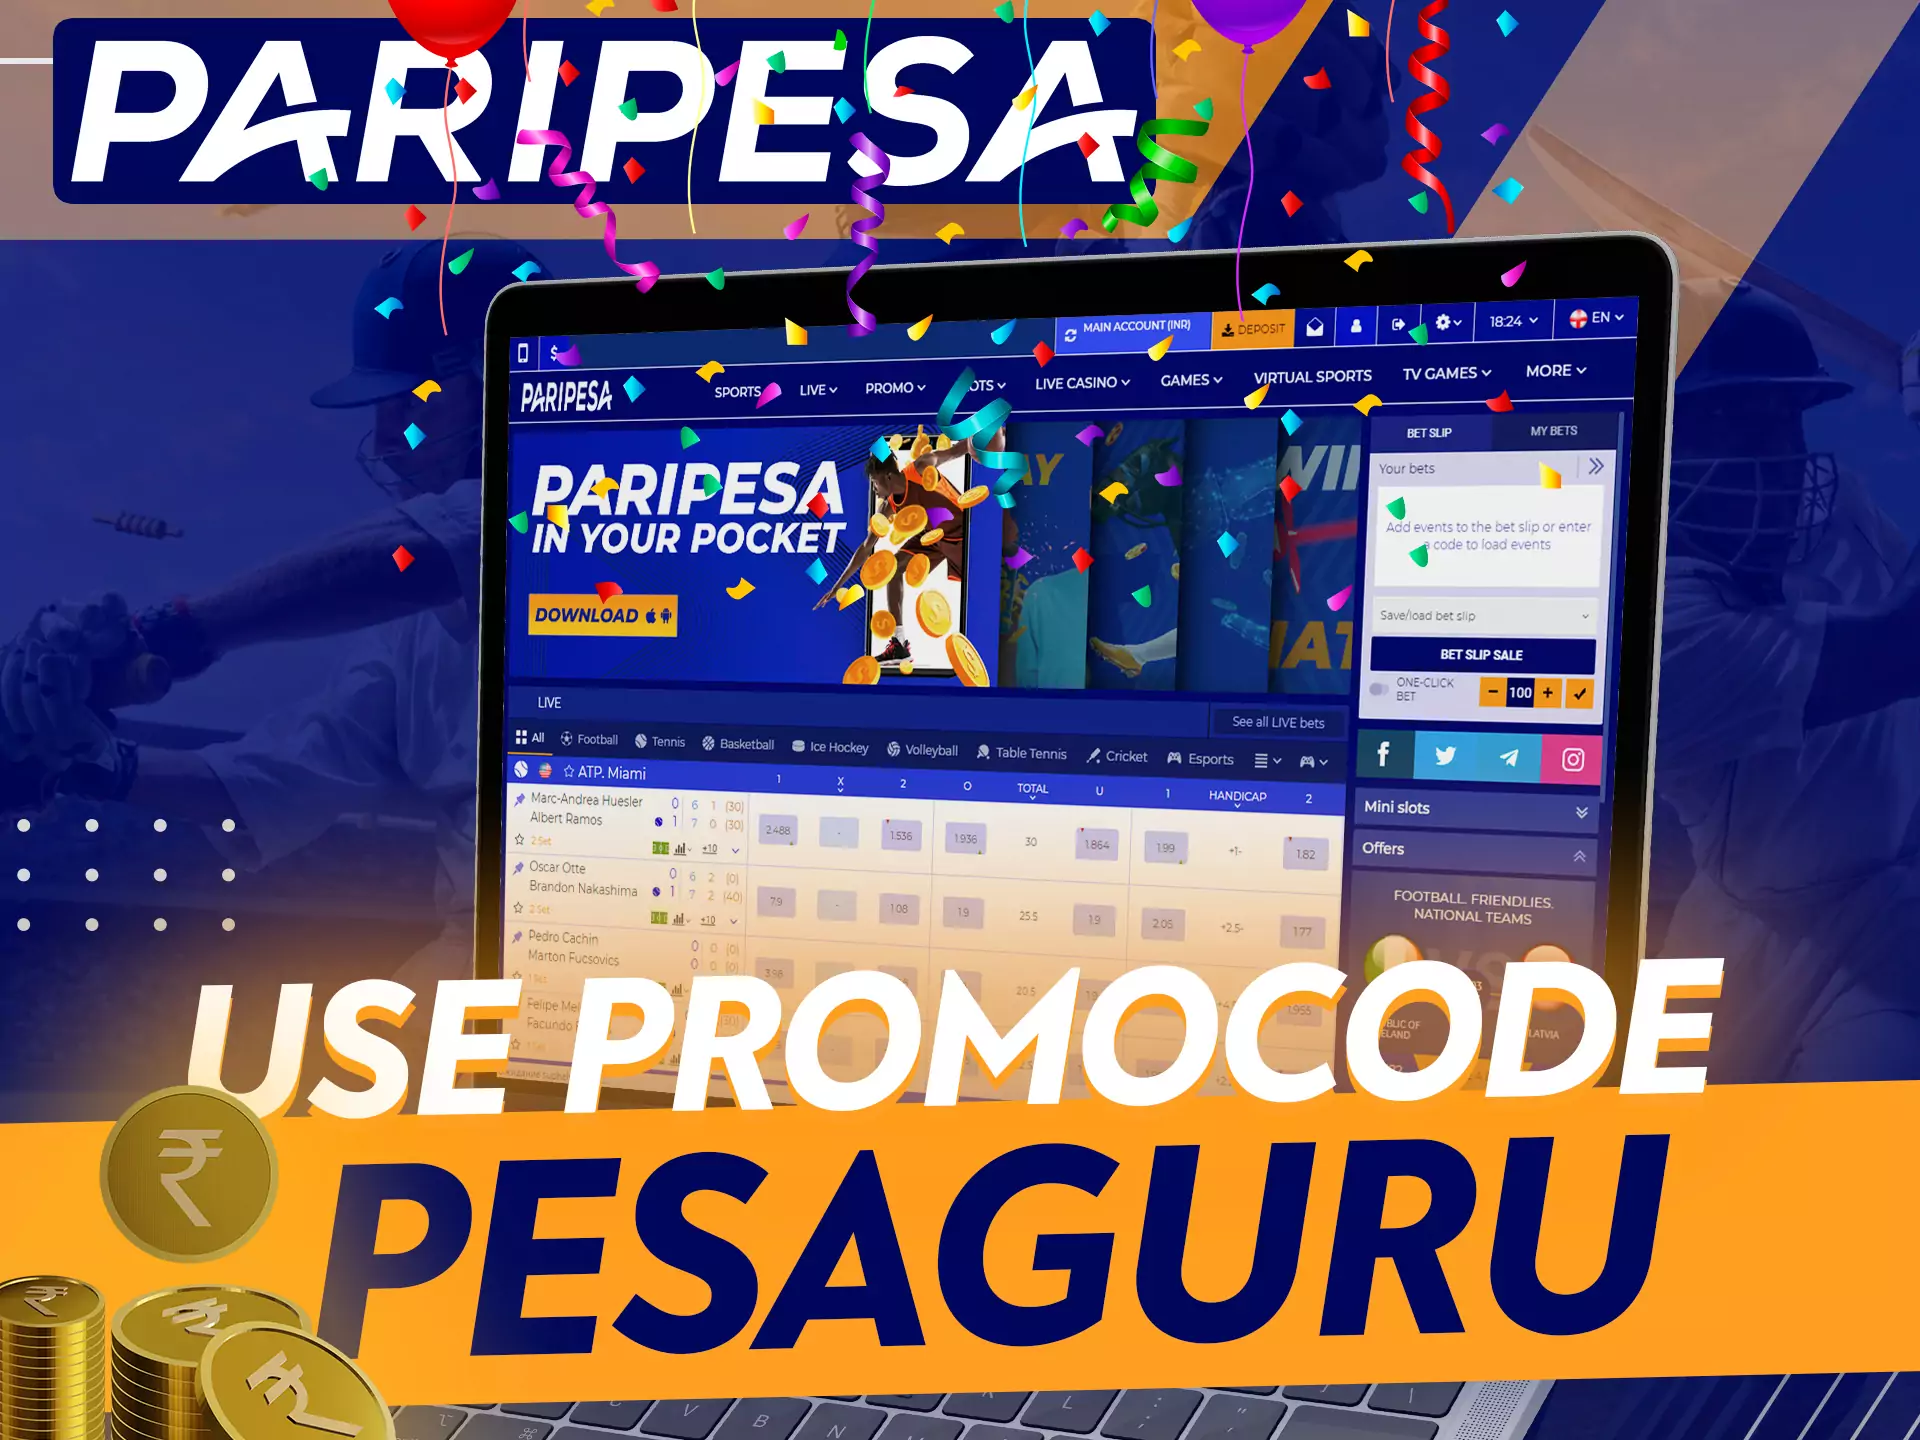 Be sure to use a promo code when registering for Paripesa.